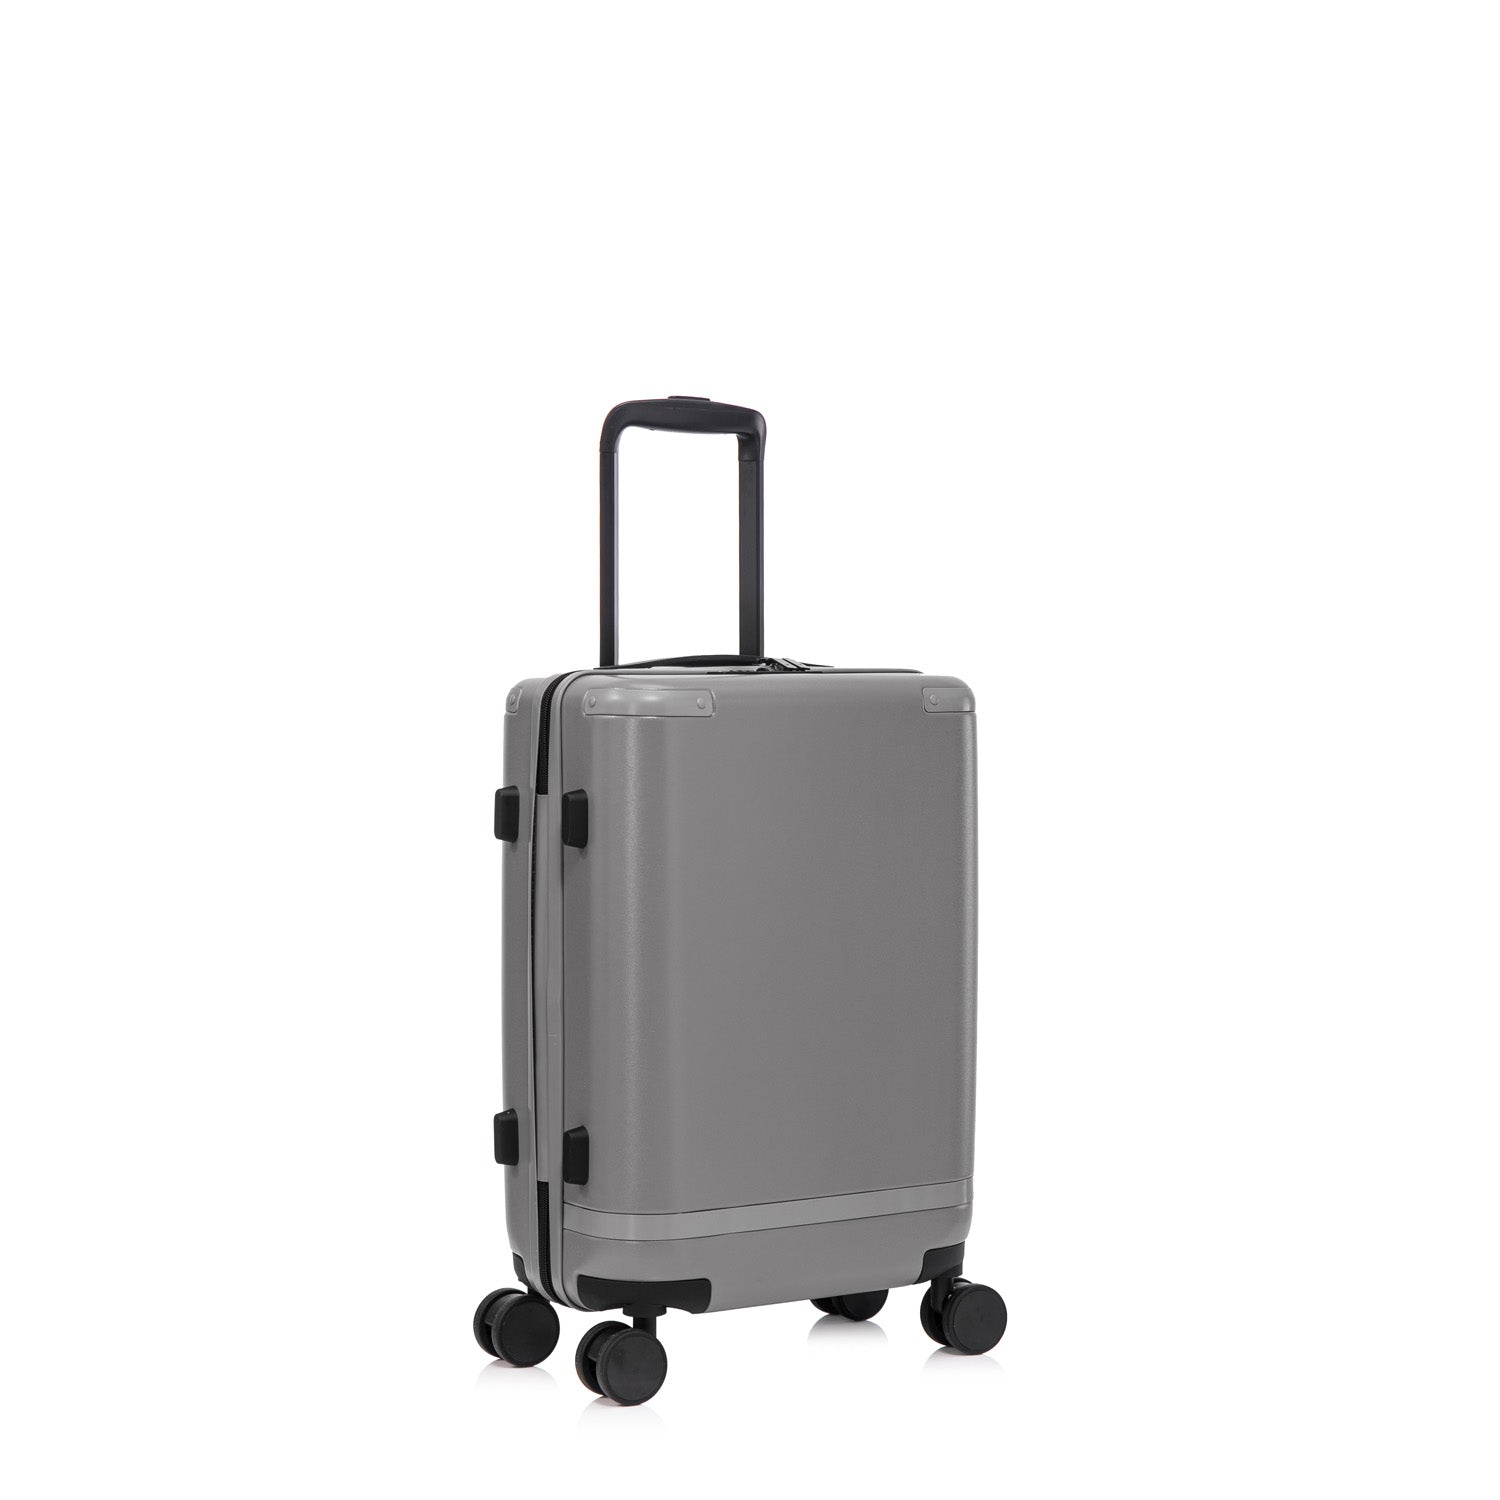 Qantas- QF250 ROME 56cm Small cabin spinner suitcase - Charcoal-5